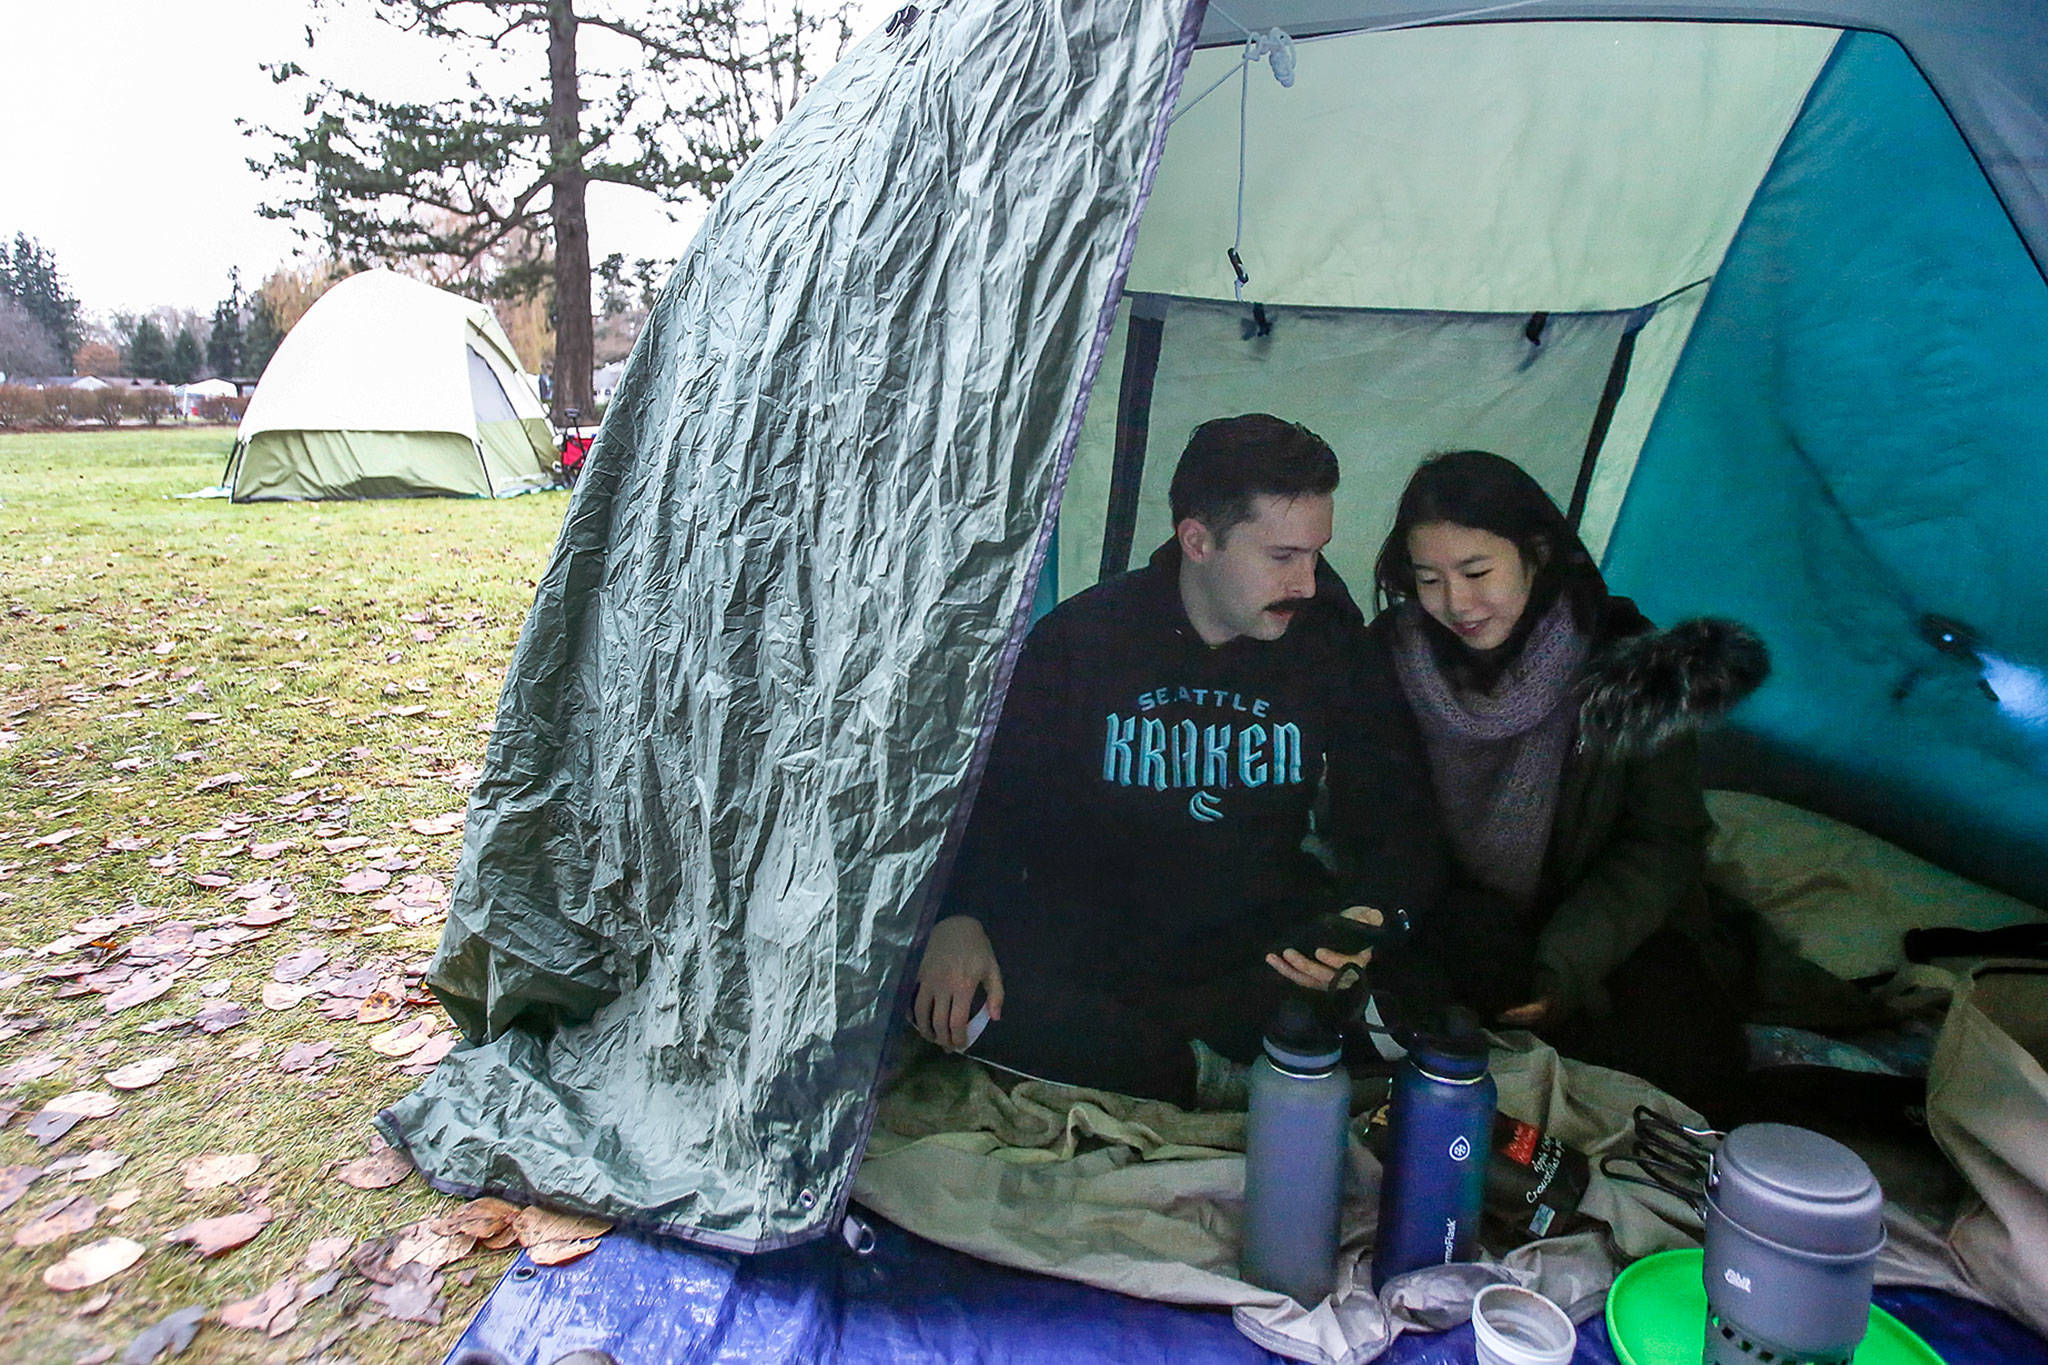 Each week, Bobby Warwick, a U.S. citizen, and Sarah Foo, of Canada, set up a makeshift tarp shelter at Peace Arch Historical State Park. (Kevin Clark / The Herald)